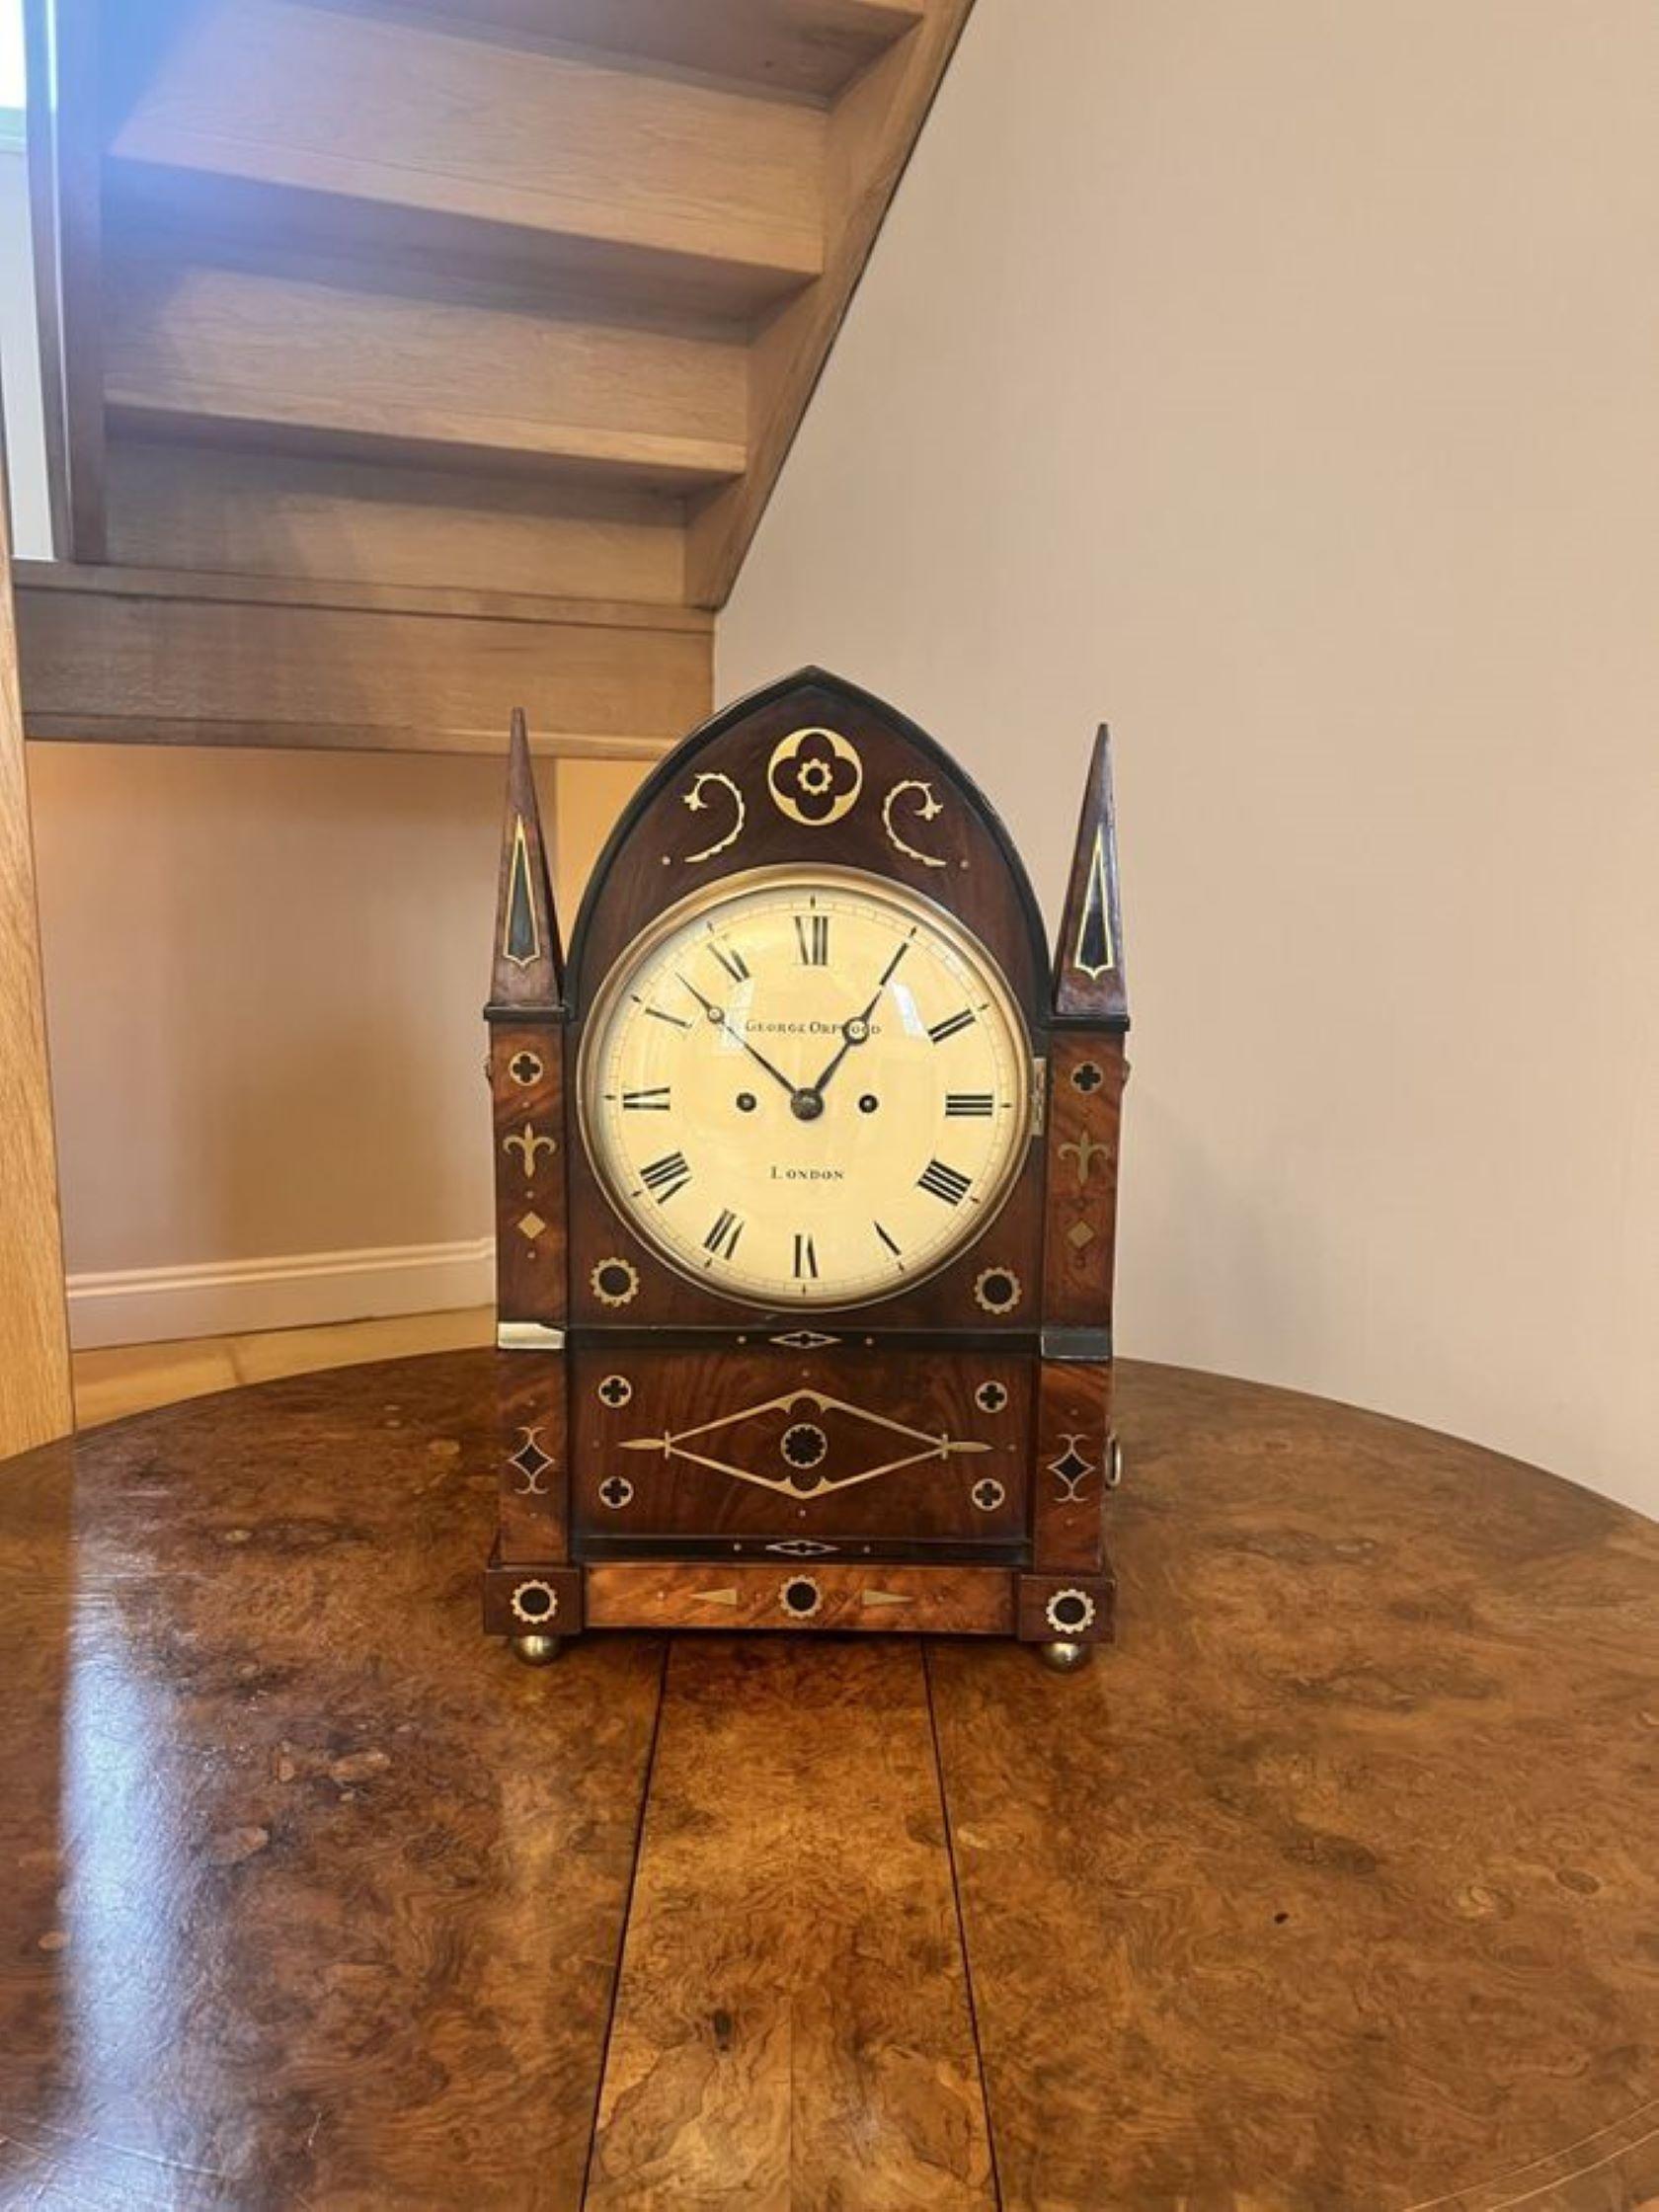 Outstanding quality large antique regency brass inlaid bracket clock by George Orpwood, having an outstanding quality unusual architecture design mahogany case inlaid with ebony and fantastic brass inlay, brass frets panels and lion mask handles to